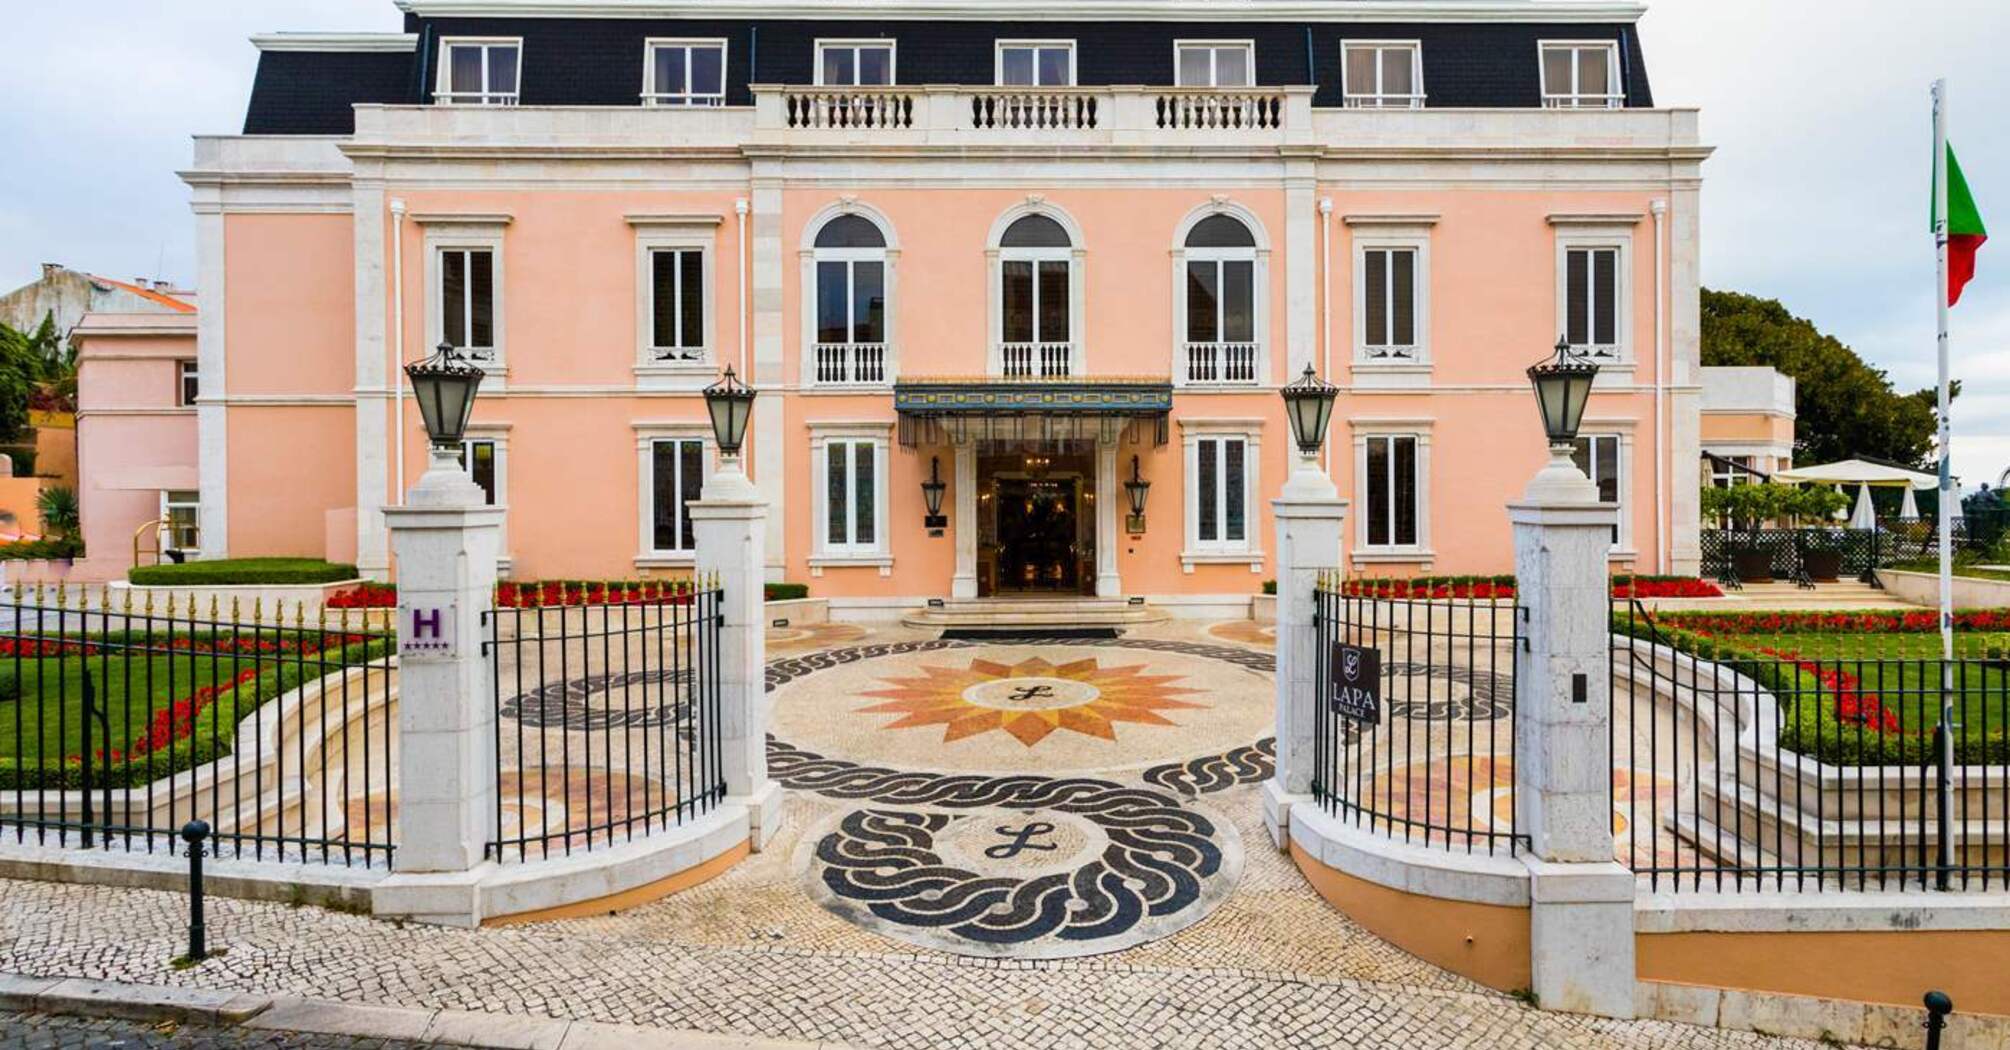 Top 9 luxury hotels in Lisbon: from opulent palaces and historic residences to chic modern boutiques